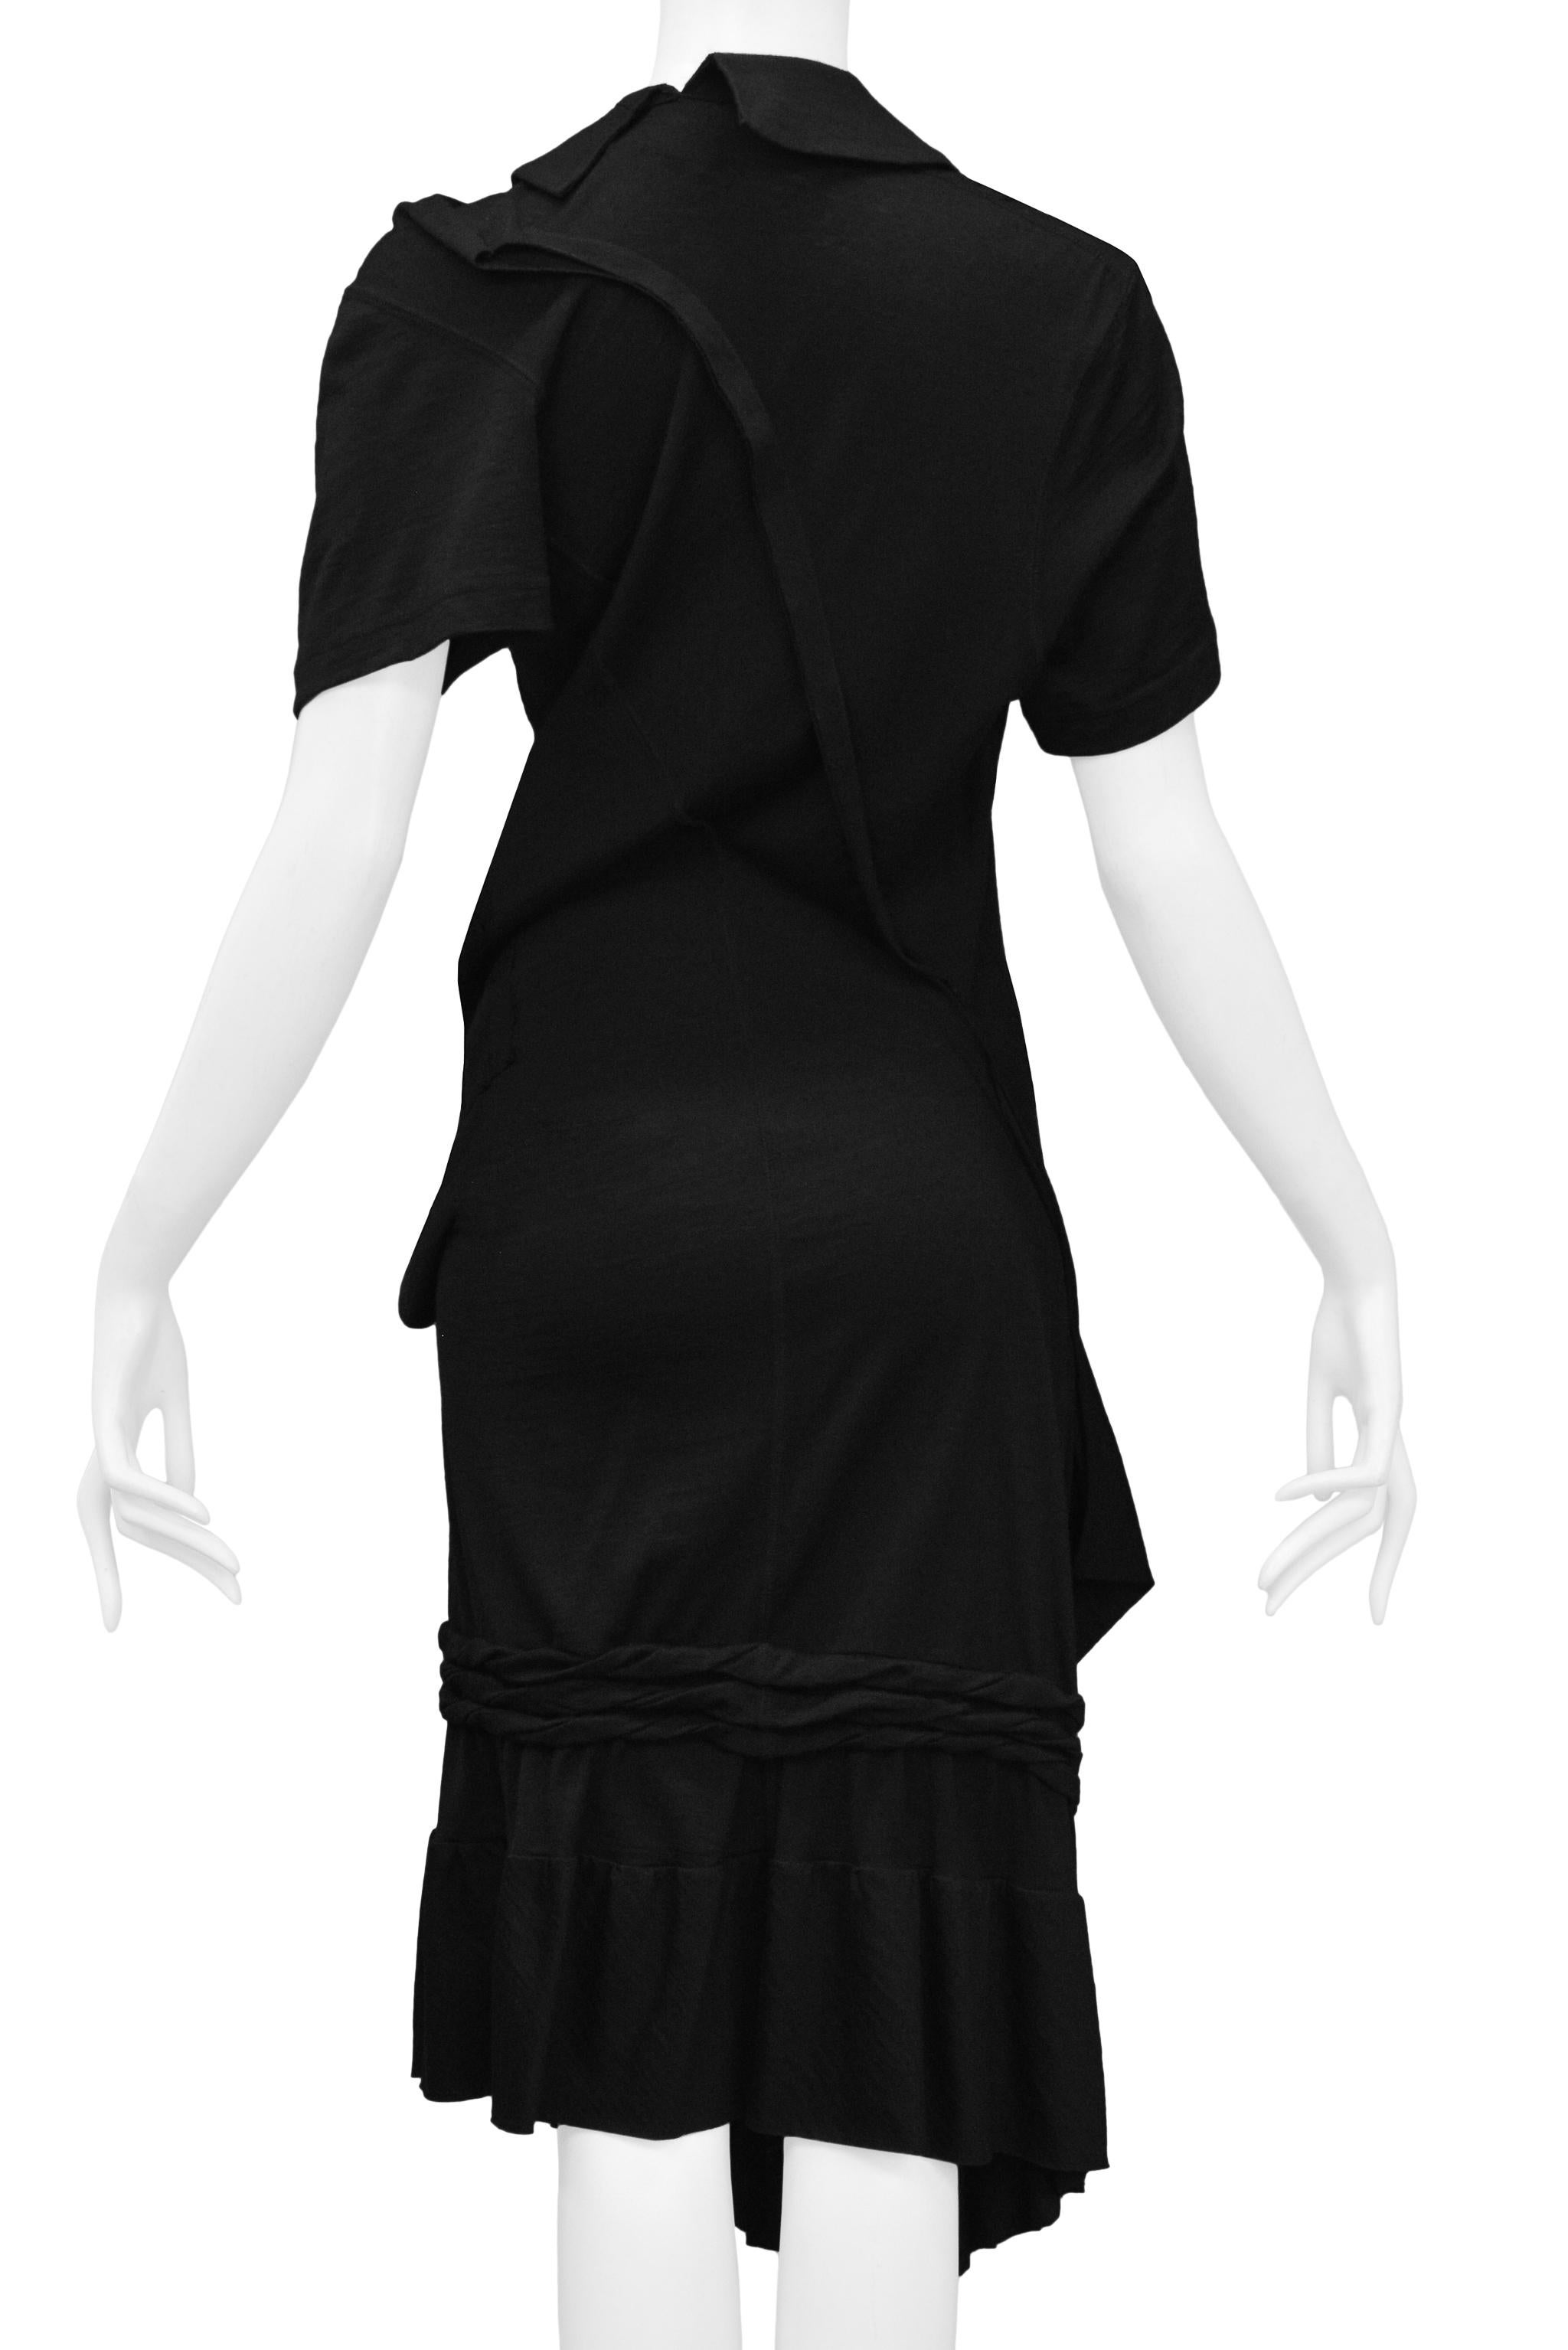 Junya Watanabe Black Twist Dress With Lace Insets 2007 For Sale 3